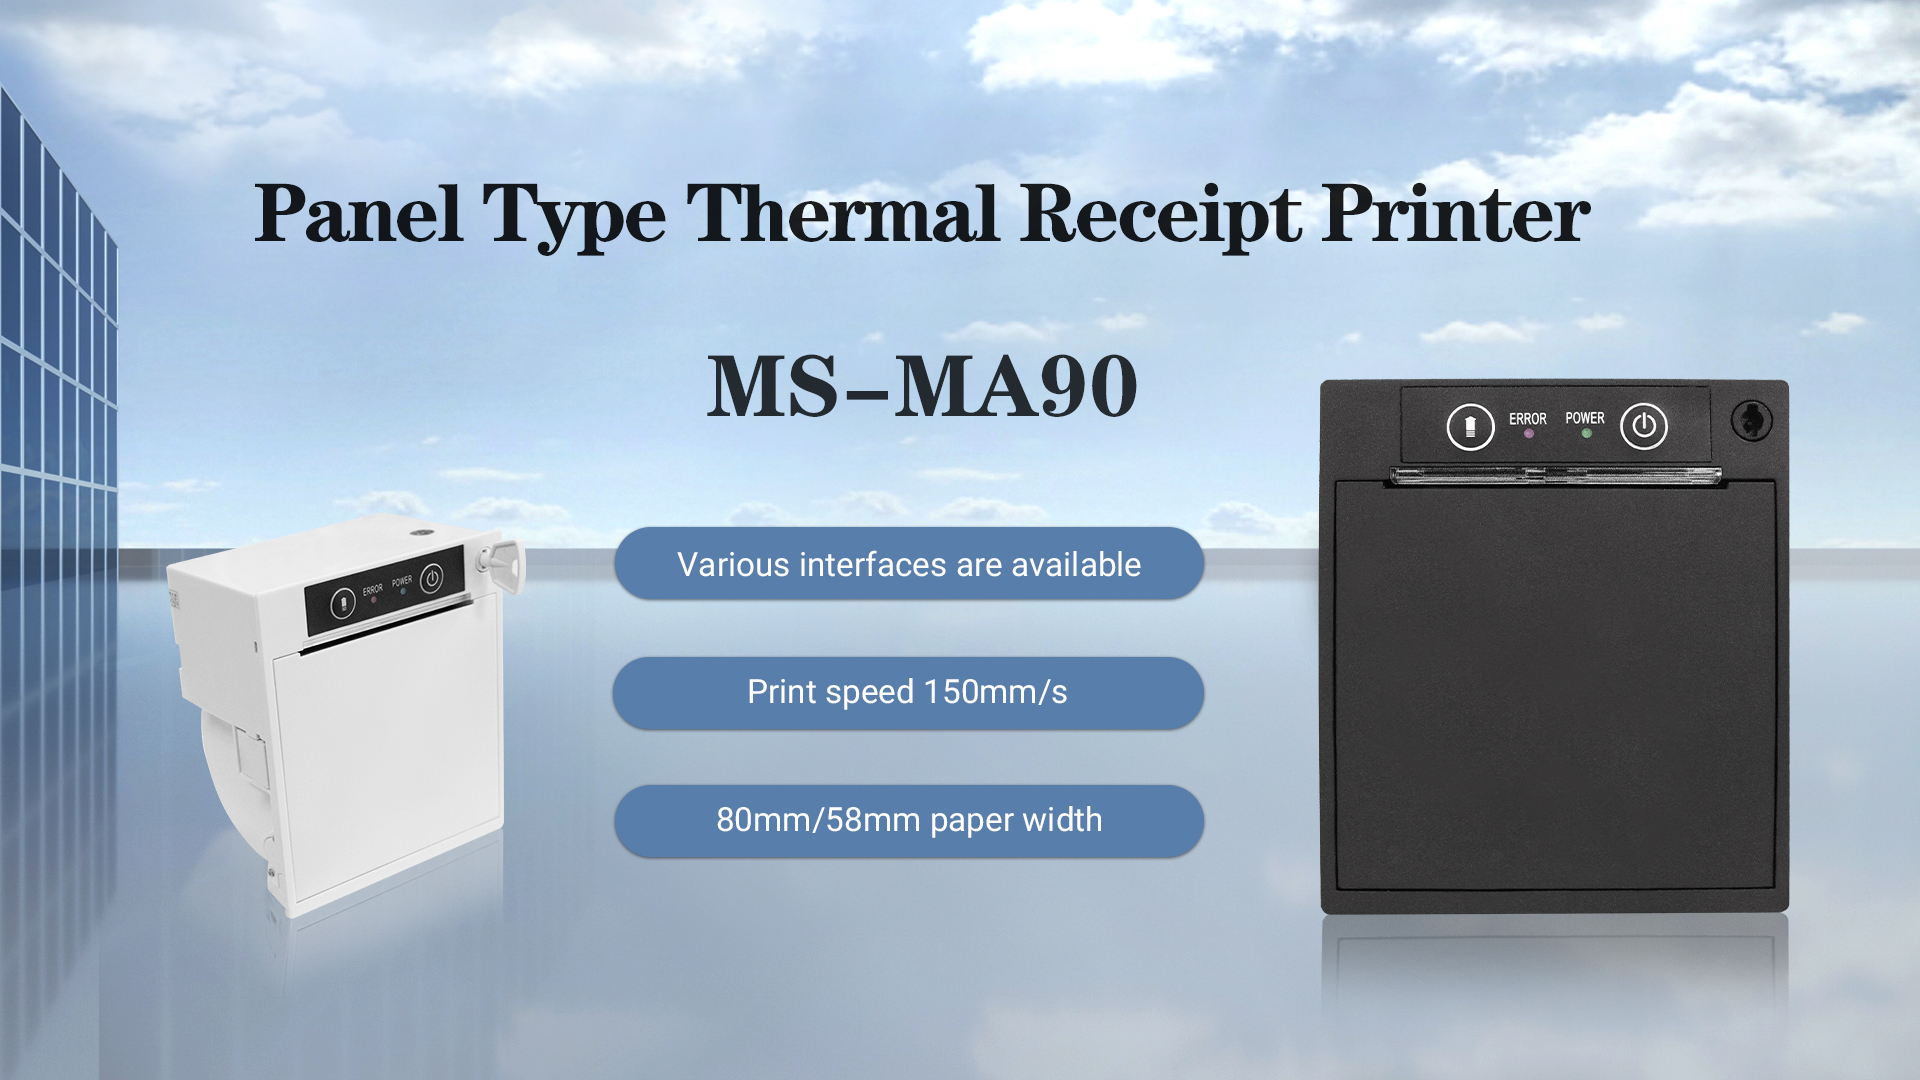 MASUNG printer MS-MA90 provides a solution for ball game number printing